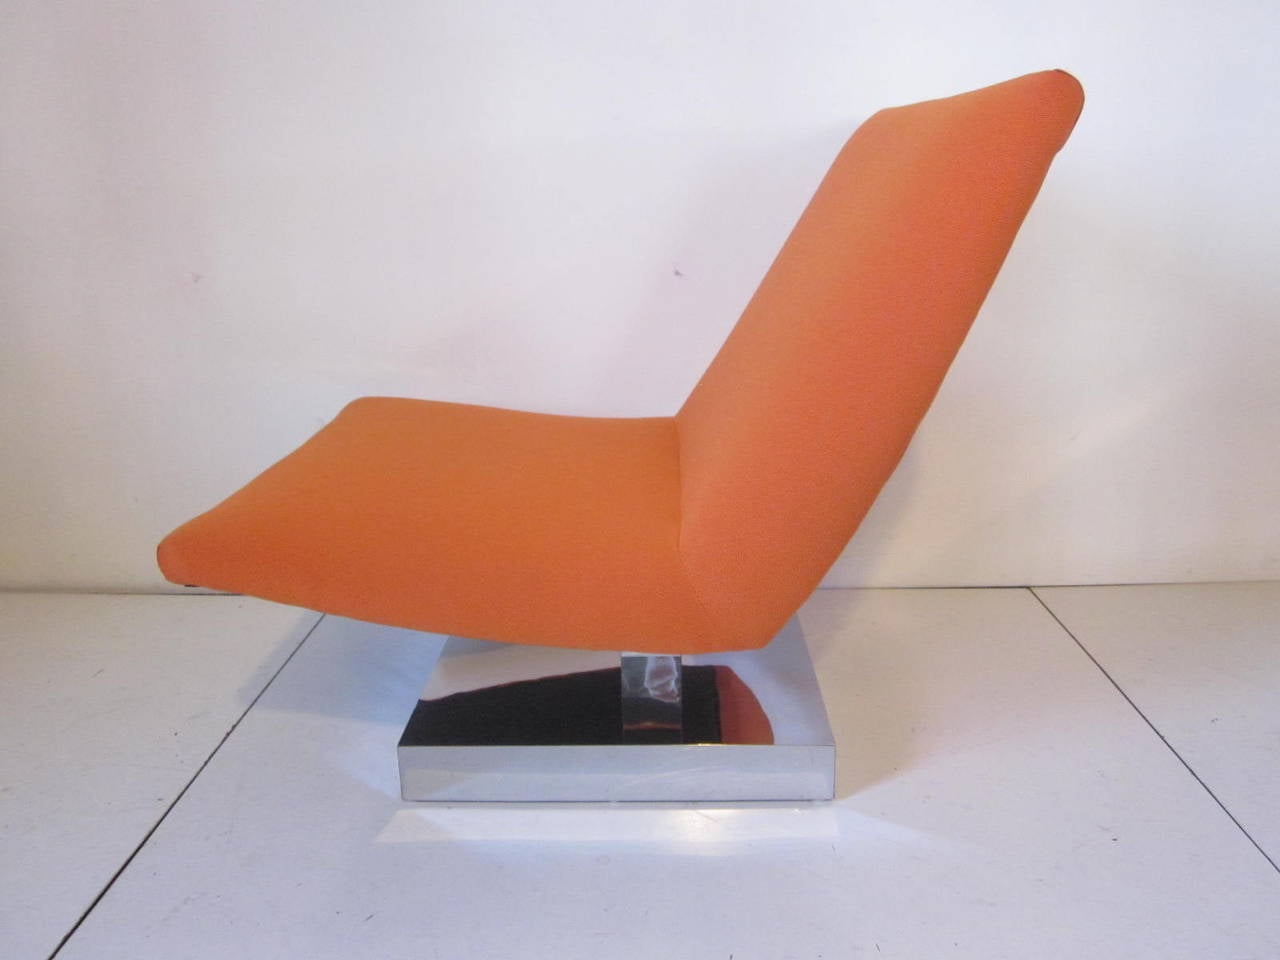 A tangerine colored upholstered lounge chair sitting on a chrome platform base in the manner of Milo Baughman.